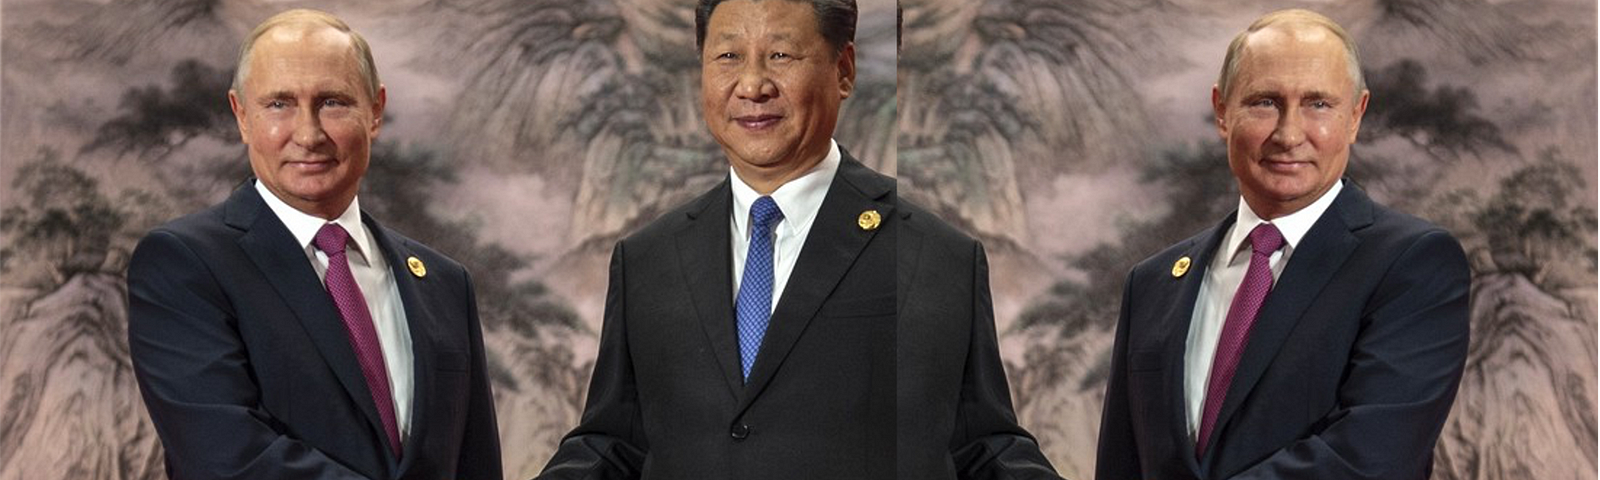 Modified mirror image of Presidents Putin and Xi shaking hands. Mirrored to look as if Xi is shaking hands with Putin on his Left and on his Right. At once, suggesting that Putin is screwing him ‘coming and going’ and/or reminding us that Xi ‘blessed’ the invasion at its start (pre Beijing’s Winter Olympics) and is now bookending the slaughter and blow-up-a-hole-in-yet-another-former-soviet-republic-and-fill-it infrastructure rebuild contracts with talks of ‘peace’. Quite a pair.